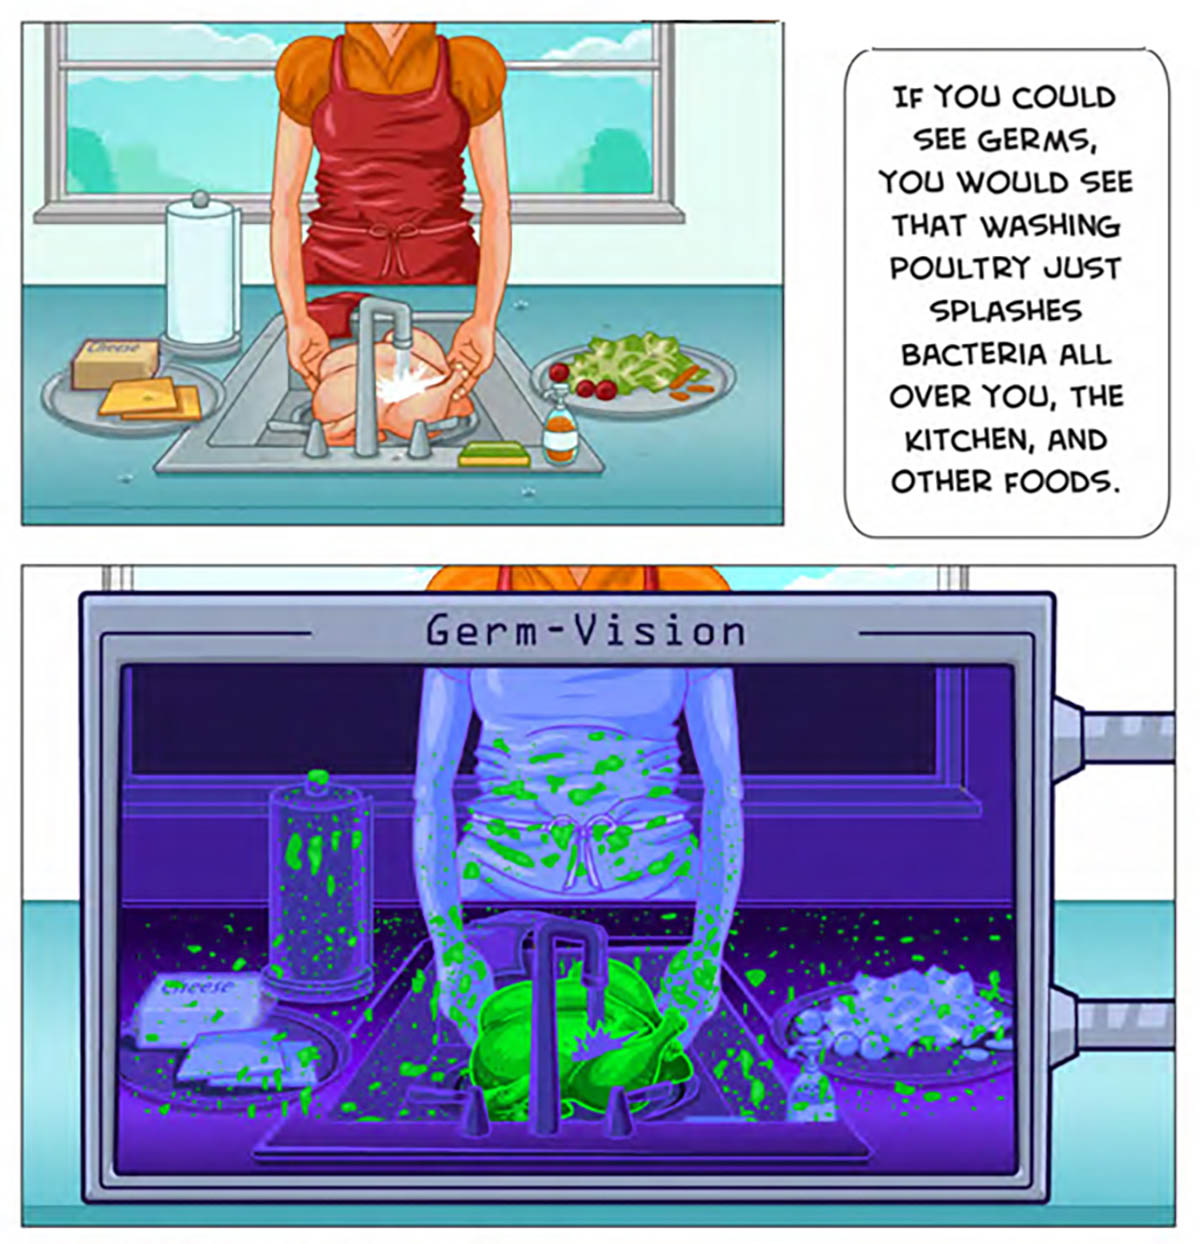 "Germ Vision" drawing shows that, if you could see bacteria, you would know that washing raw poultry only spreads bacteria around without killing them.